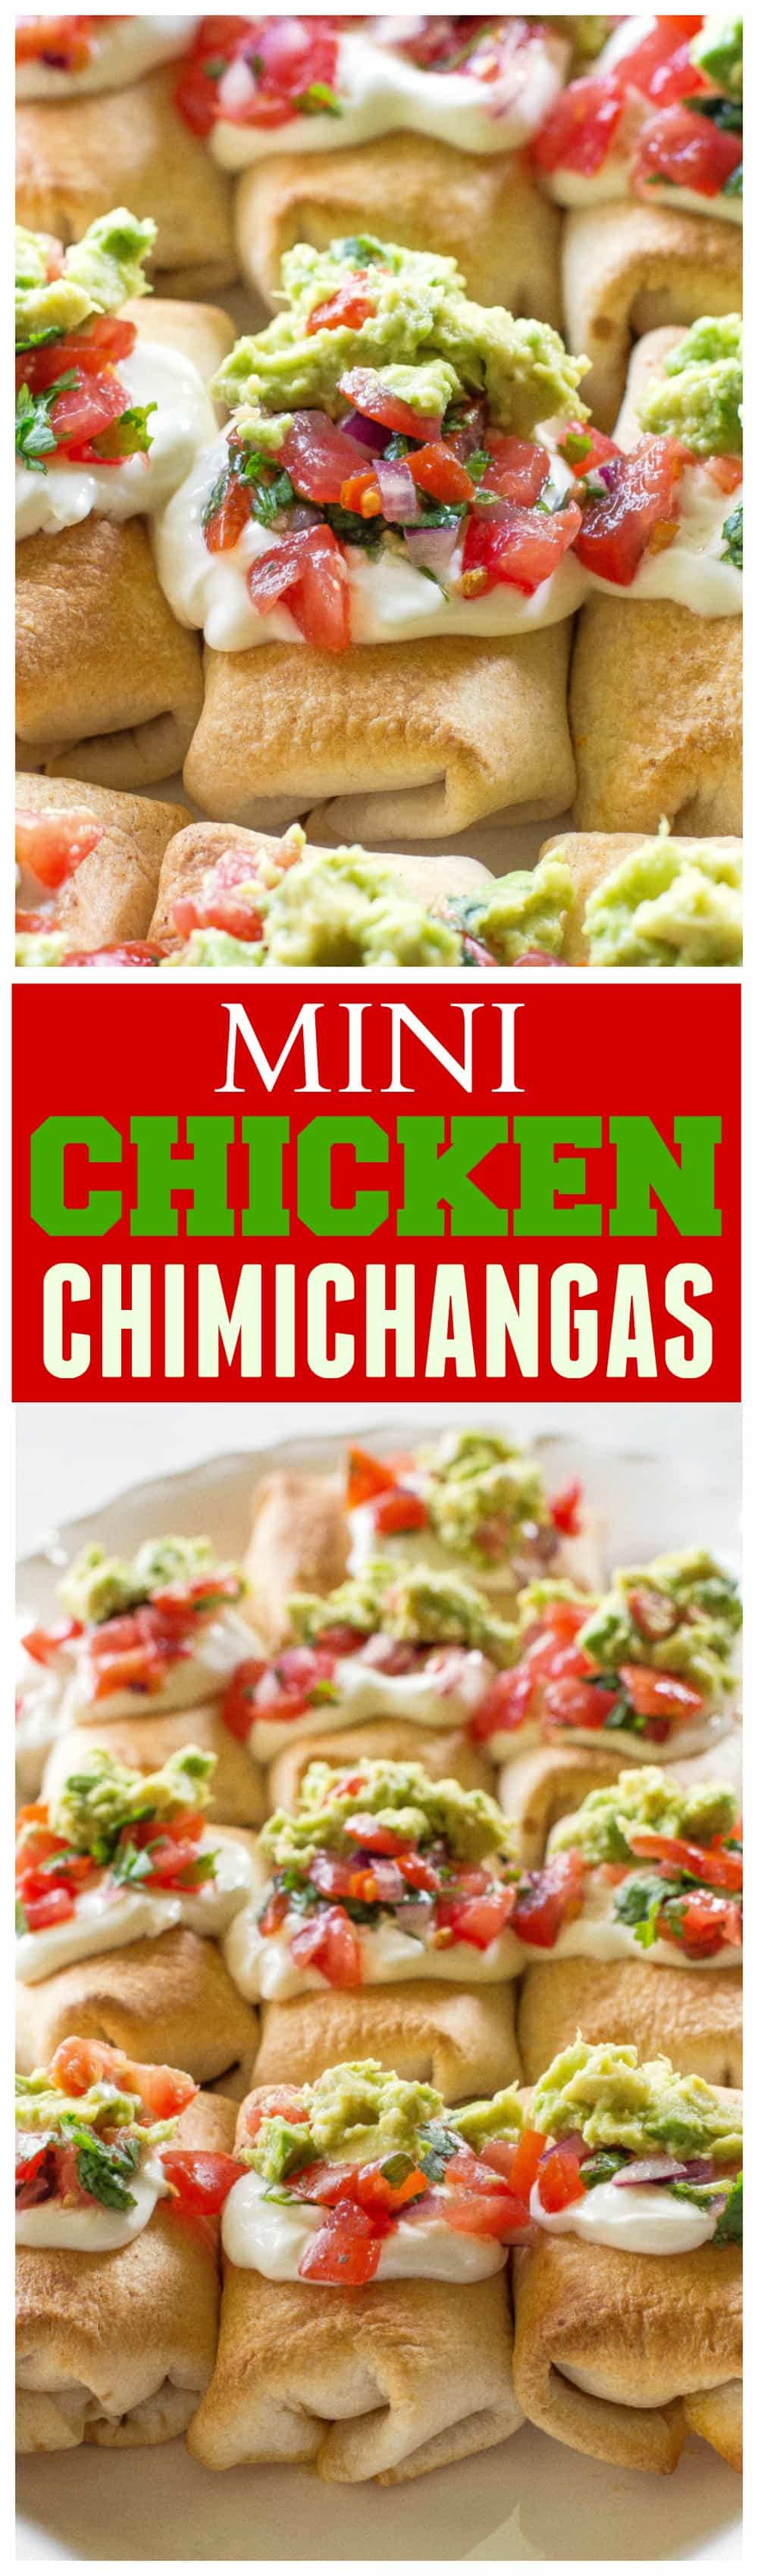 Mini Chicken Chimichangas - these mini Mexican appetizers are filled with creamy chicken and spicy Pepper Jack cheese. #cincodemayo #chicken #chimichangas #mexican #dinners